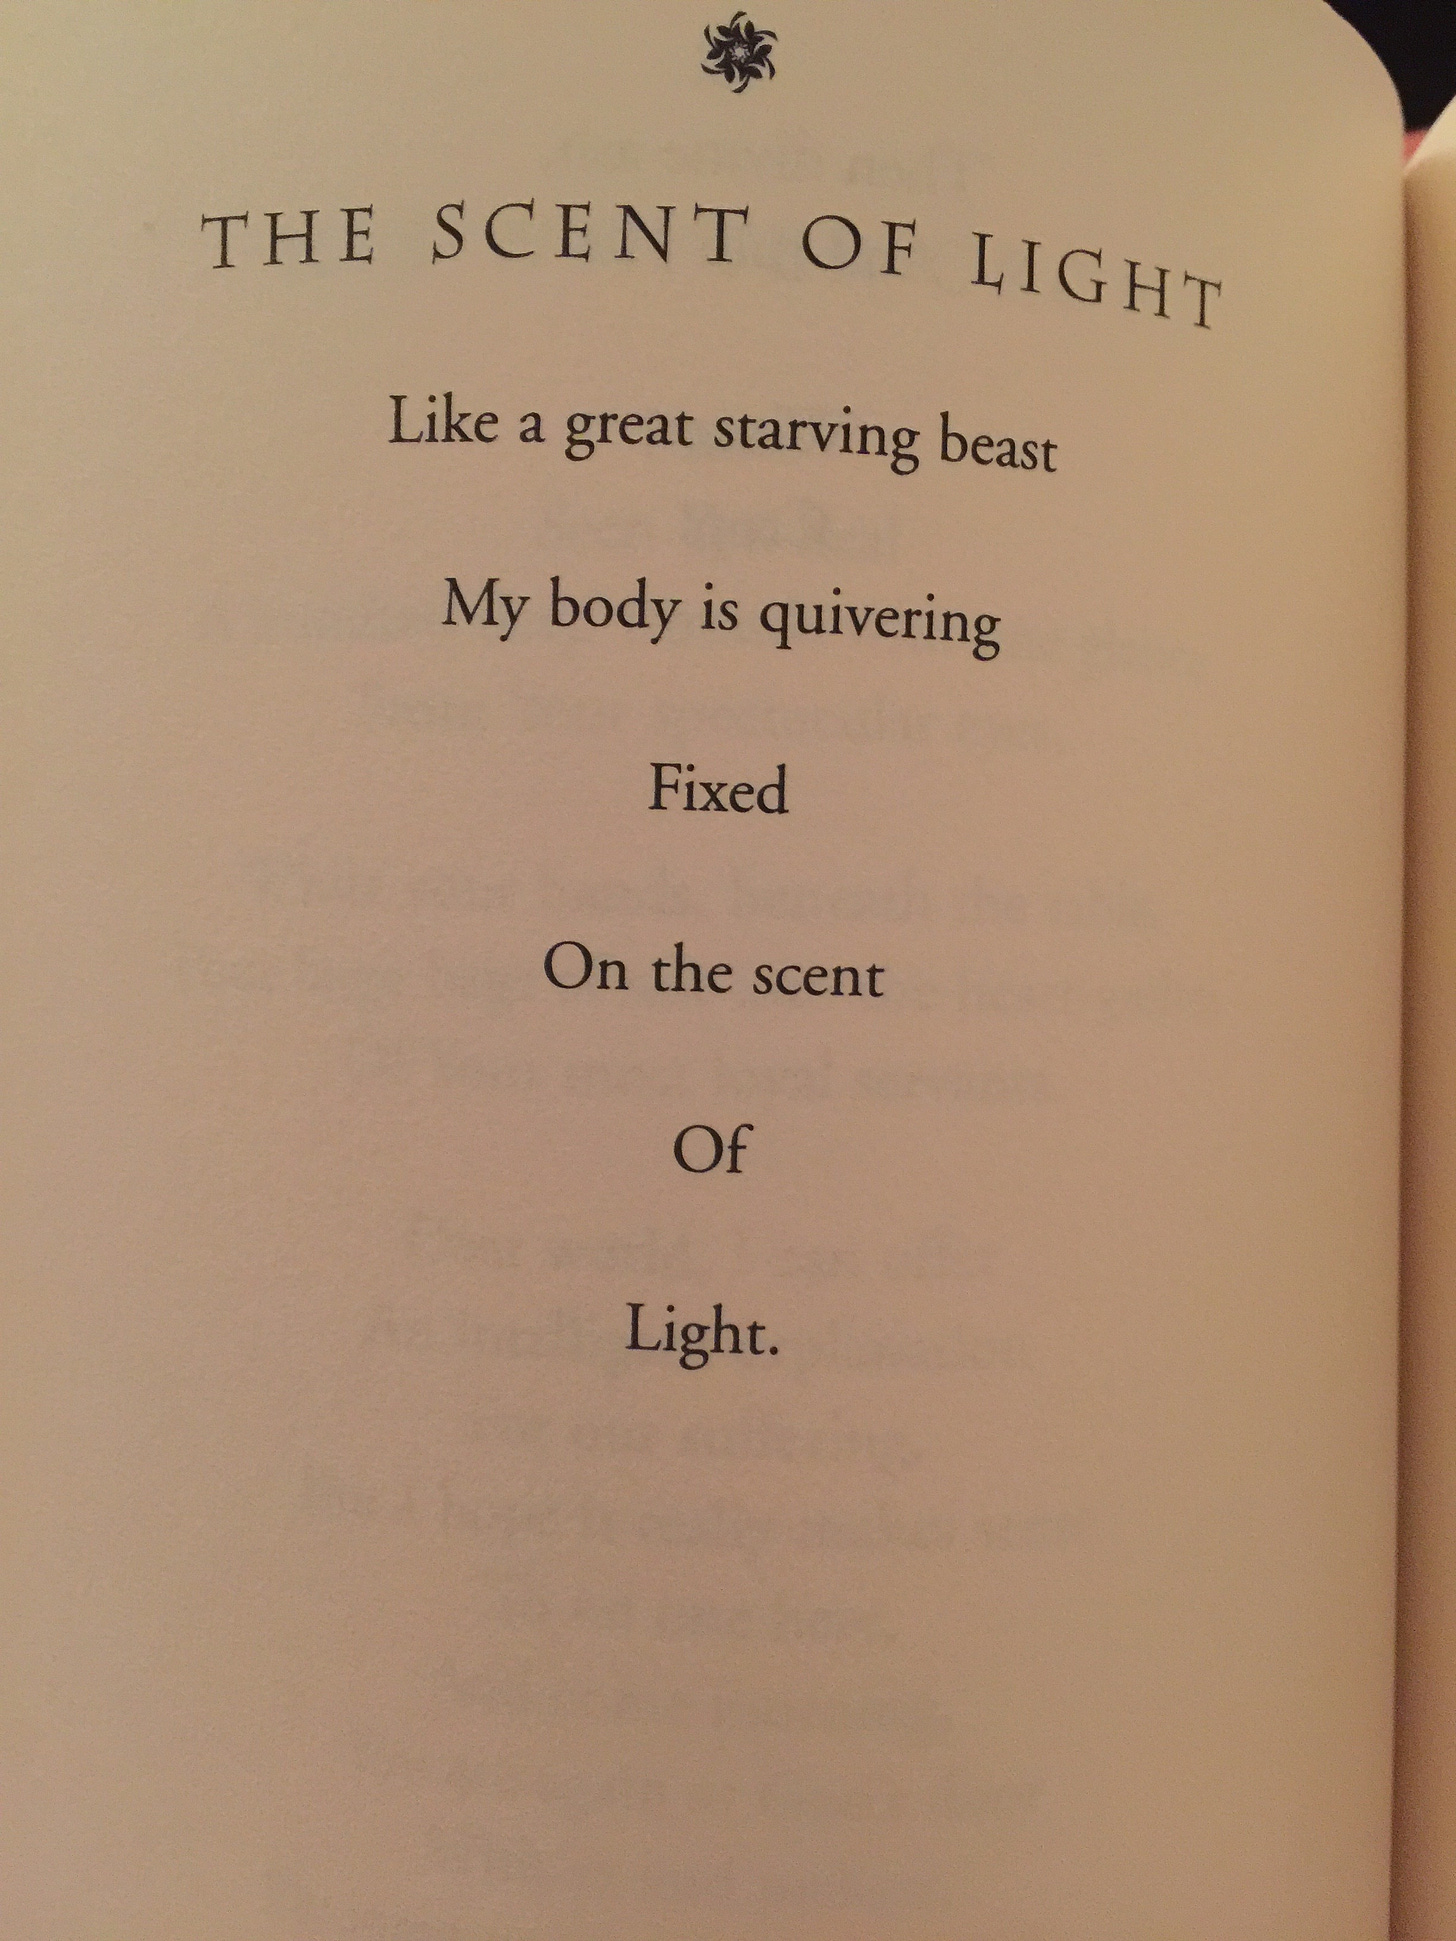 image from a book of poetry by Hafiz reads: THE SCENT OF LIGHT, Like a great starving beast My body is quivering Fixed On the scent Of Light